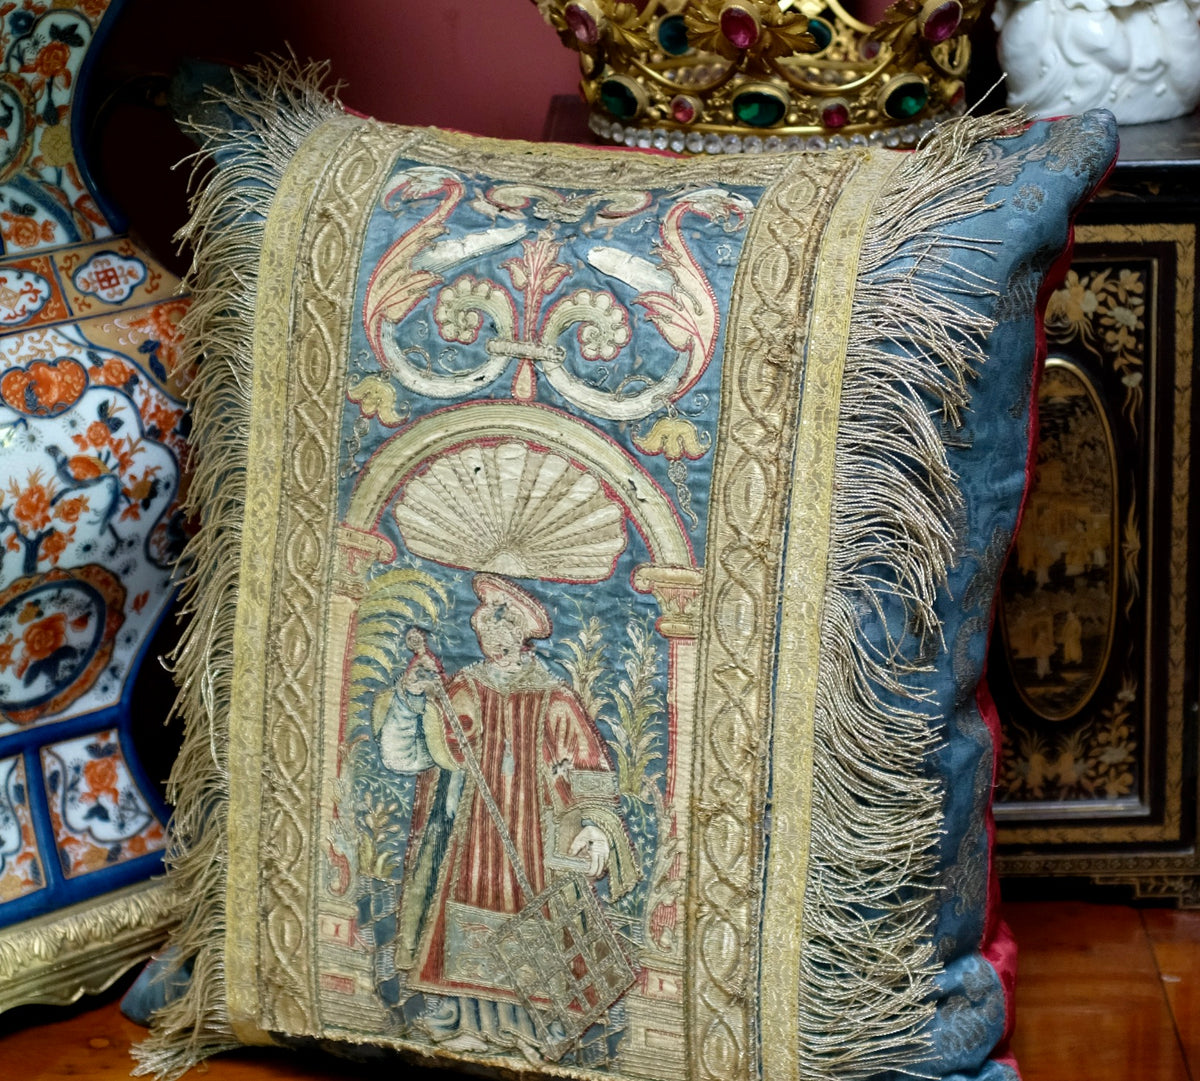 Medieval Tapestry Pillow Cover - Medieval Decor Accent Pillow